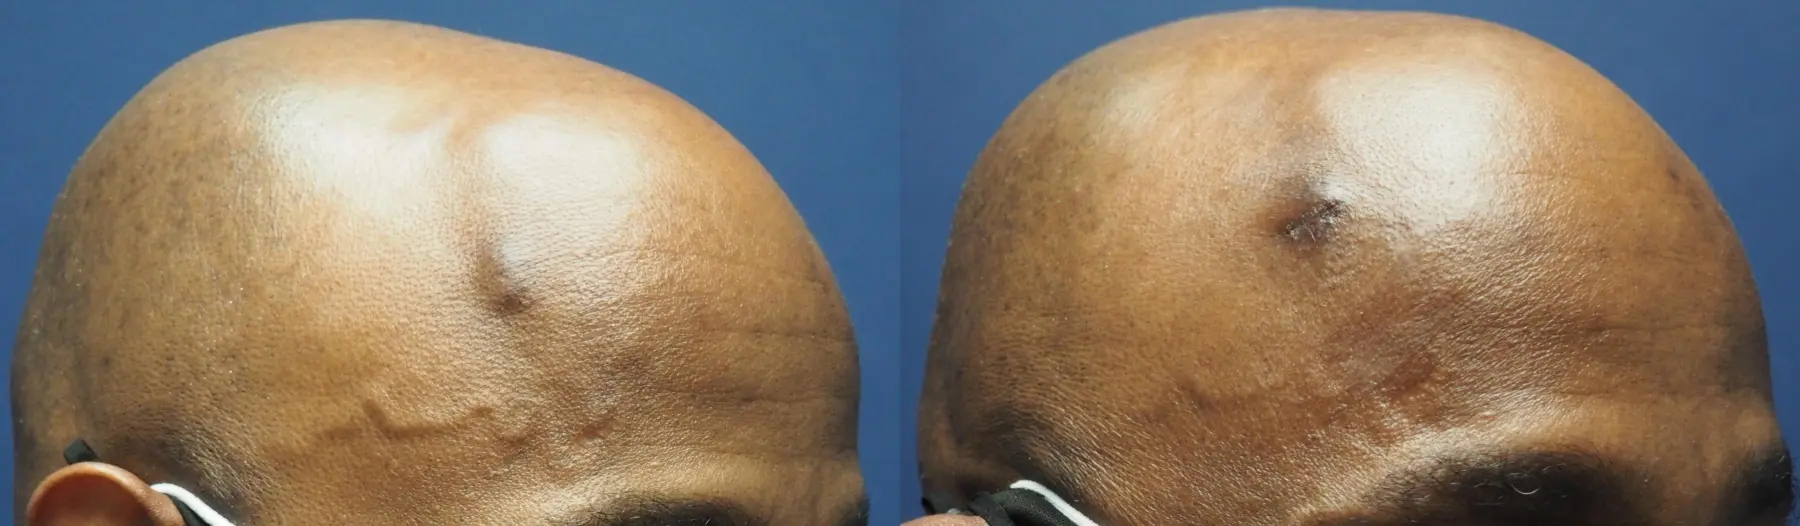 Mole Or Age Spot Removal: Patient 3 - Before and After  